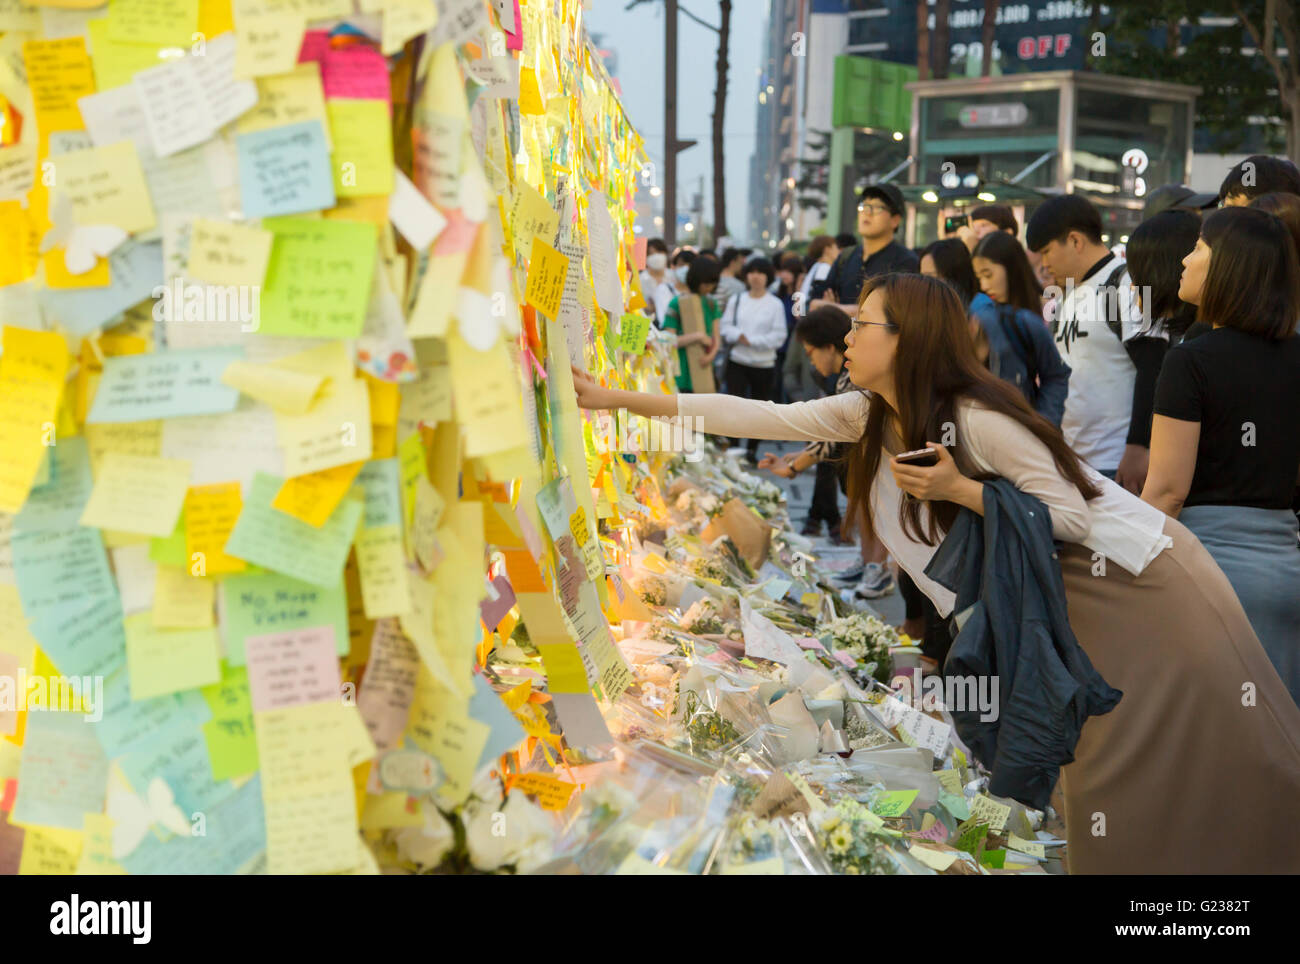 Mourning the stabbing death of a woman, May 22, 2016 : People leave notes at an entrance of Gangnam subway station in Seoul, South Korea, to mourn the stabbing death of a 23-year-old woman by a male attacker. A 34-year-old man who has a record of schizophrenia, was arrested on May 17, 2016 on suspicion of killing the 23-year-old woman at a bar bathroom near the Gangnam subway station in Gangnam district, which has sparked a wave of mourning and a public outcry over violence against women in the traditionally male-dominated country. The two had never met prior to the incident, the police said. Stock Photo